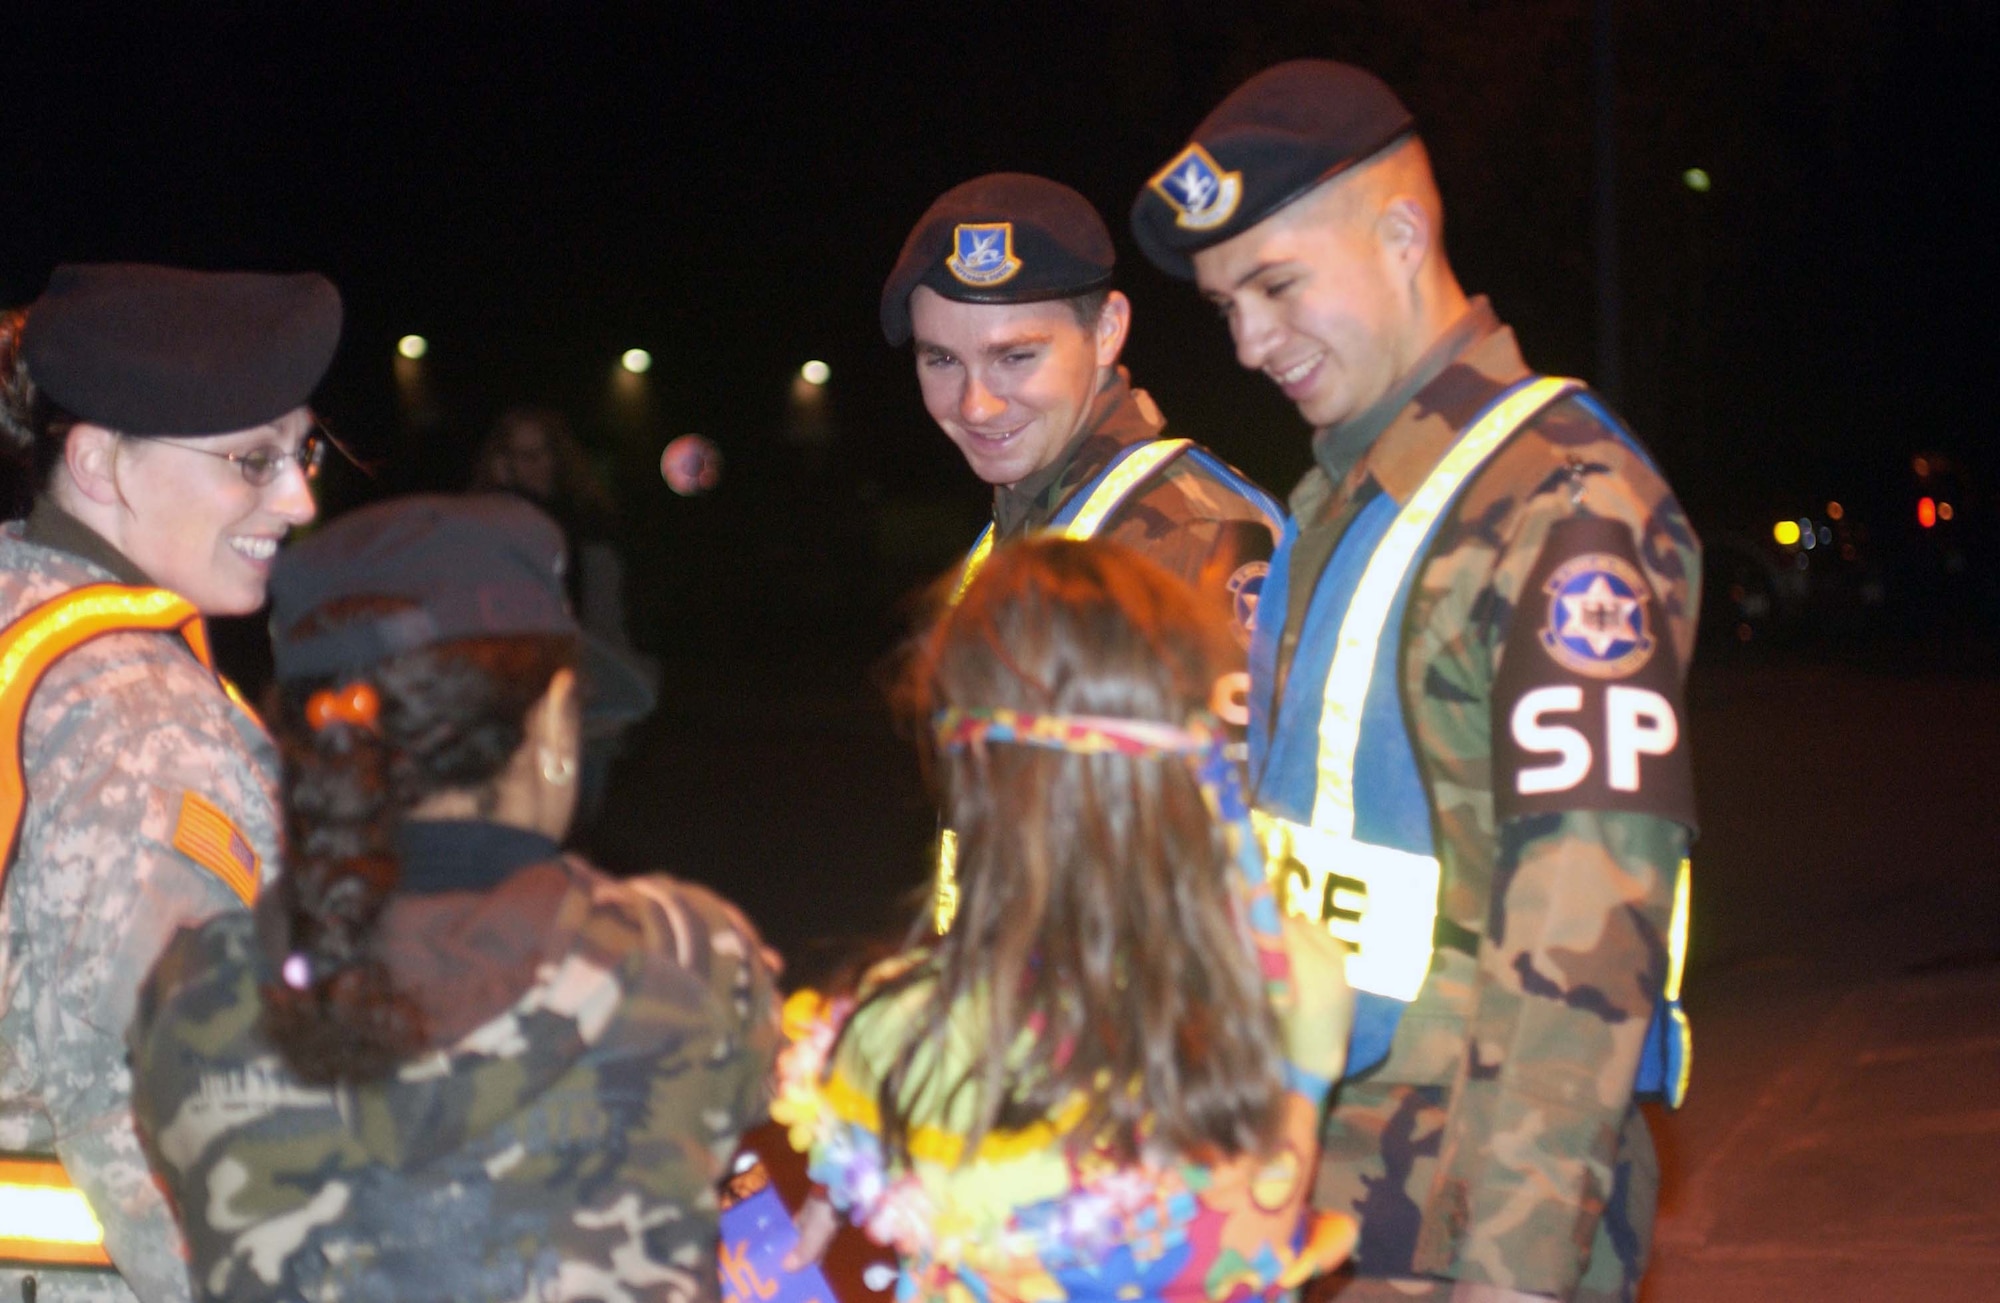 Senior Airman Dylan Gregory (center), from the 569th U.S. Forces Police Squadron, ensures two trick-or-treaters are okay on Halloween last year in the housing area on Landstuhl Regional Medical Center. On the right is his co-worker, Airman 1st Class Sinhue Castro, and to the left is Maj. Jeneen Johnson, who at the time was the U.S. Army Garrison Kaiserslautern provost marshal. Photo by Christine June, USAG Kaiserslautern. 

            